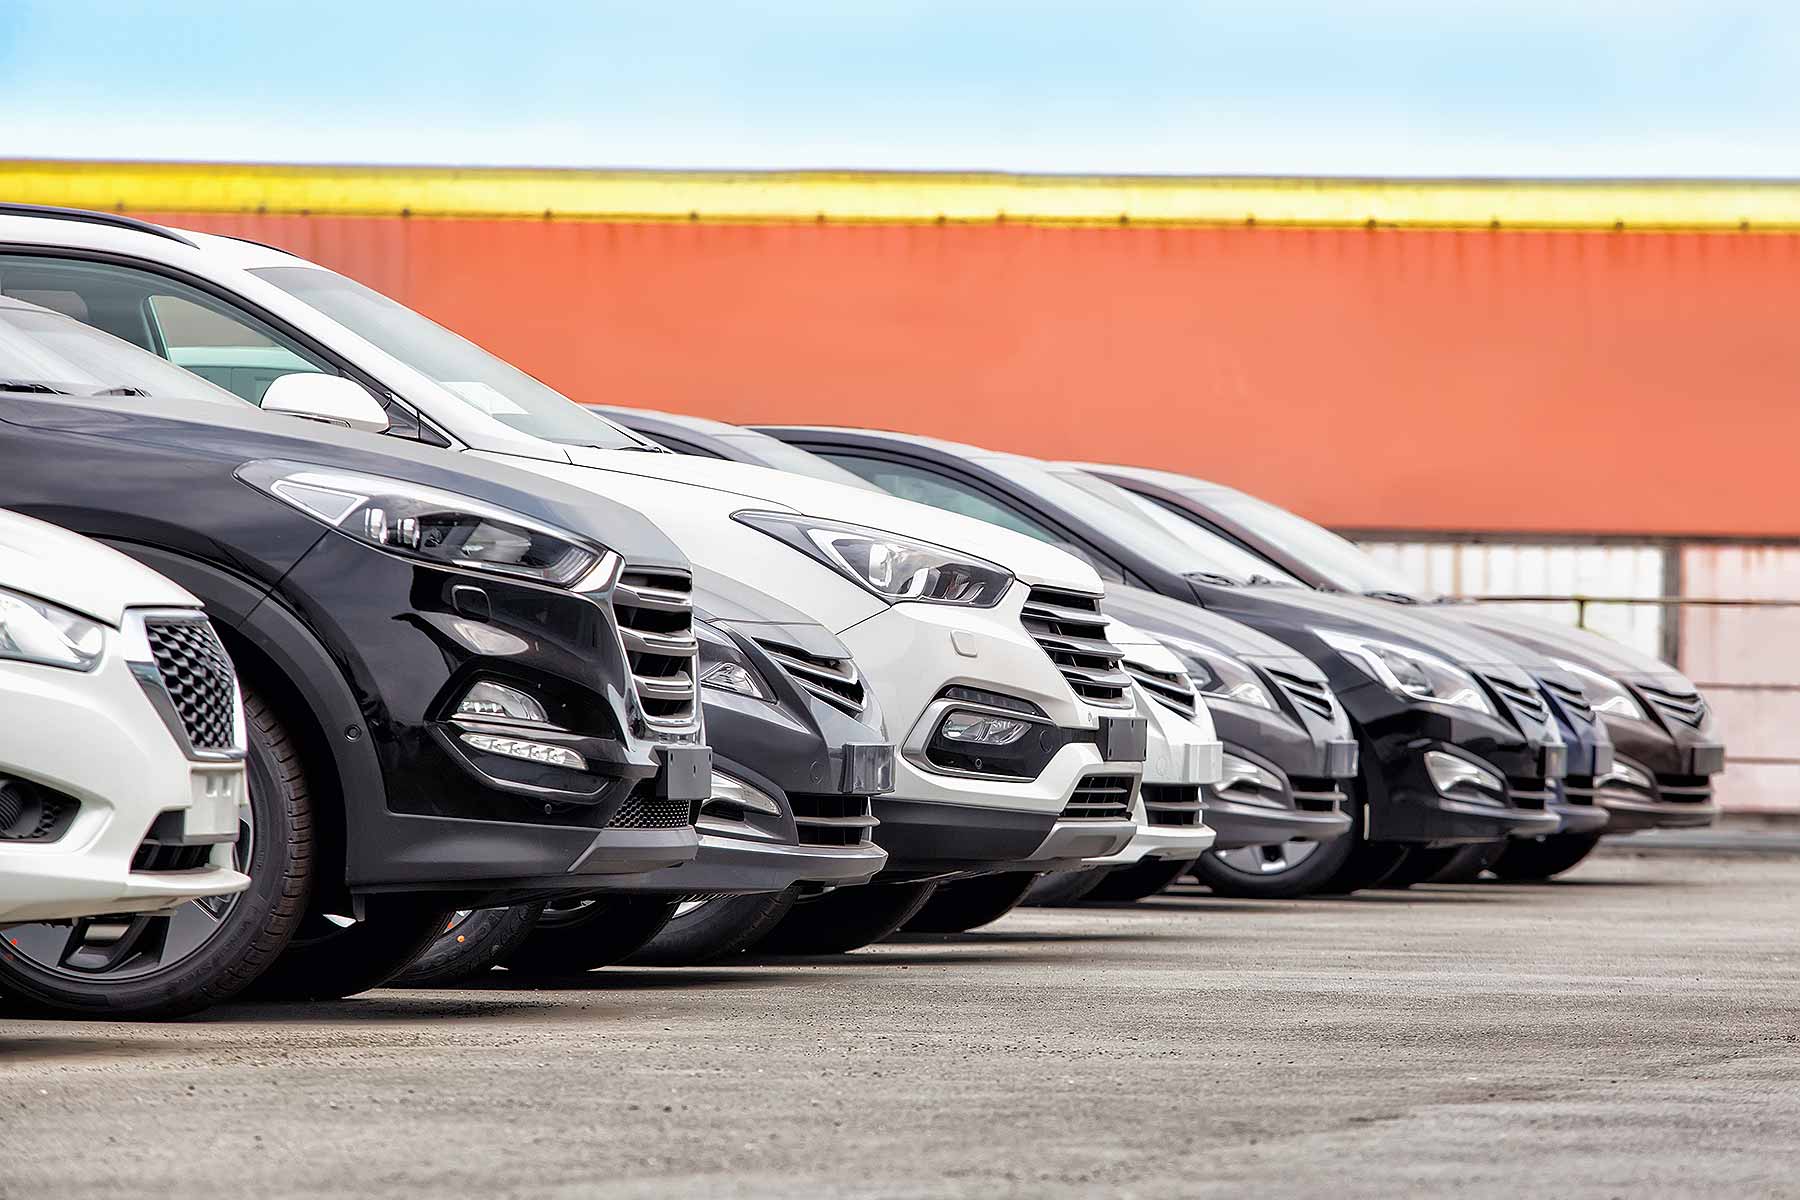 EU new car sales fall for the first time in 4 years Motoring Research